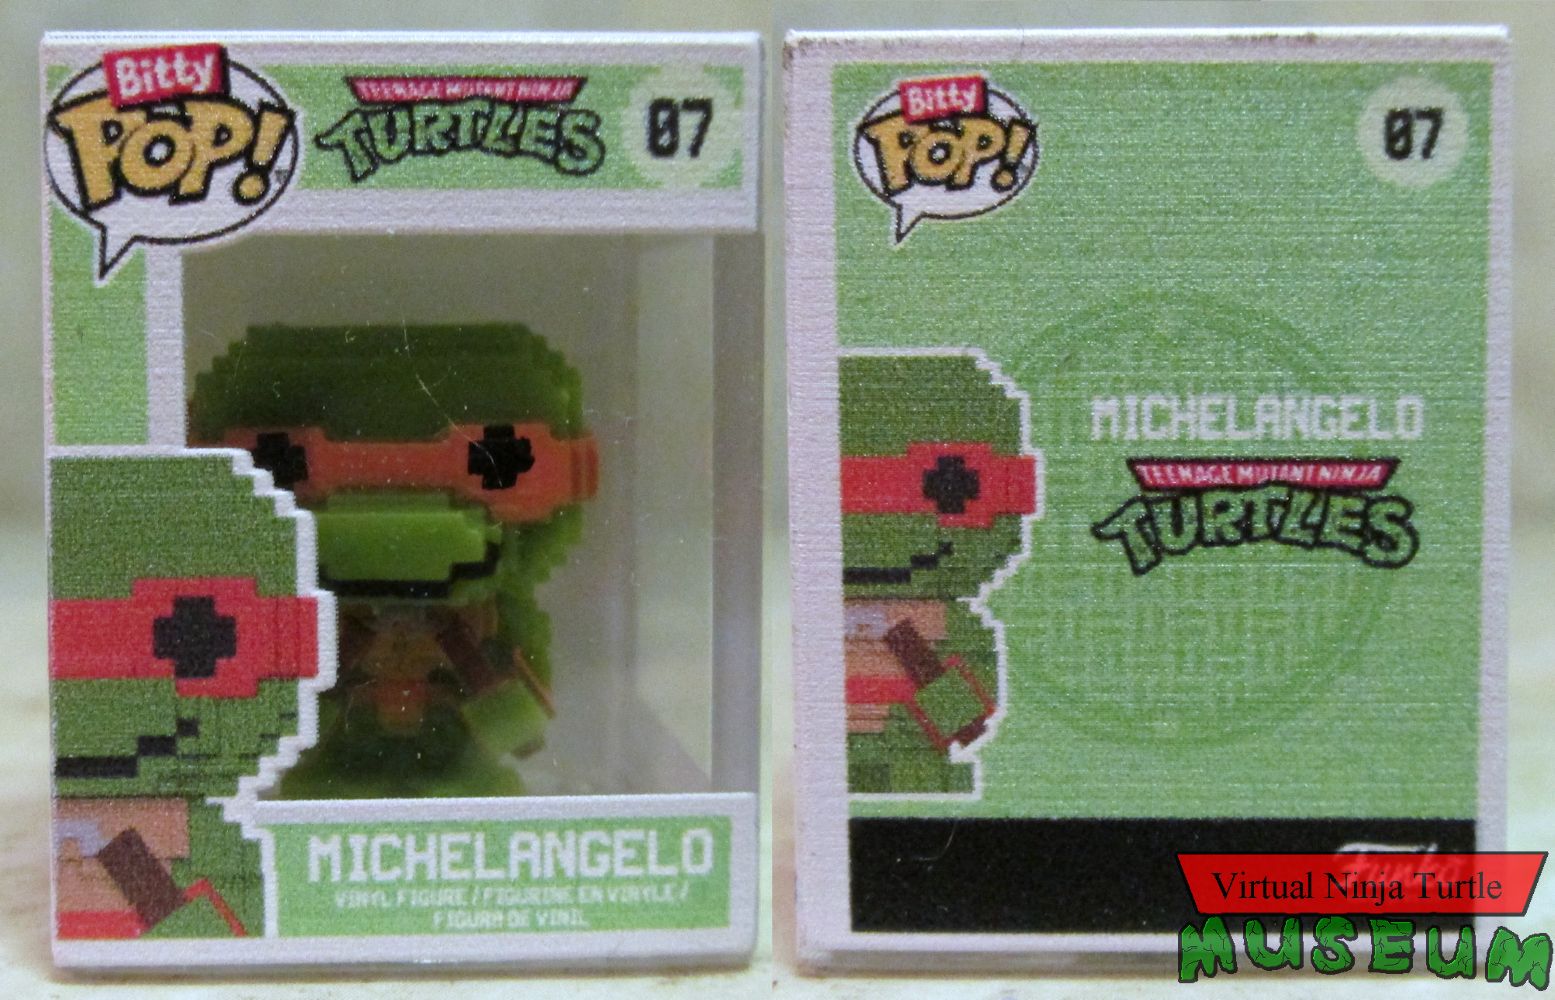 8Bit Michelangelo in case front and back